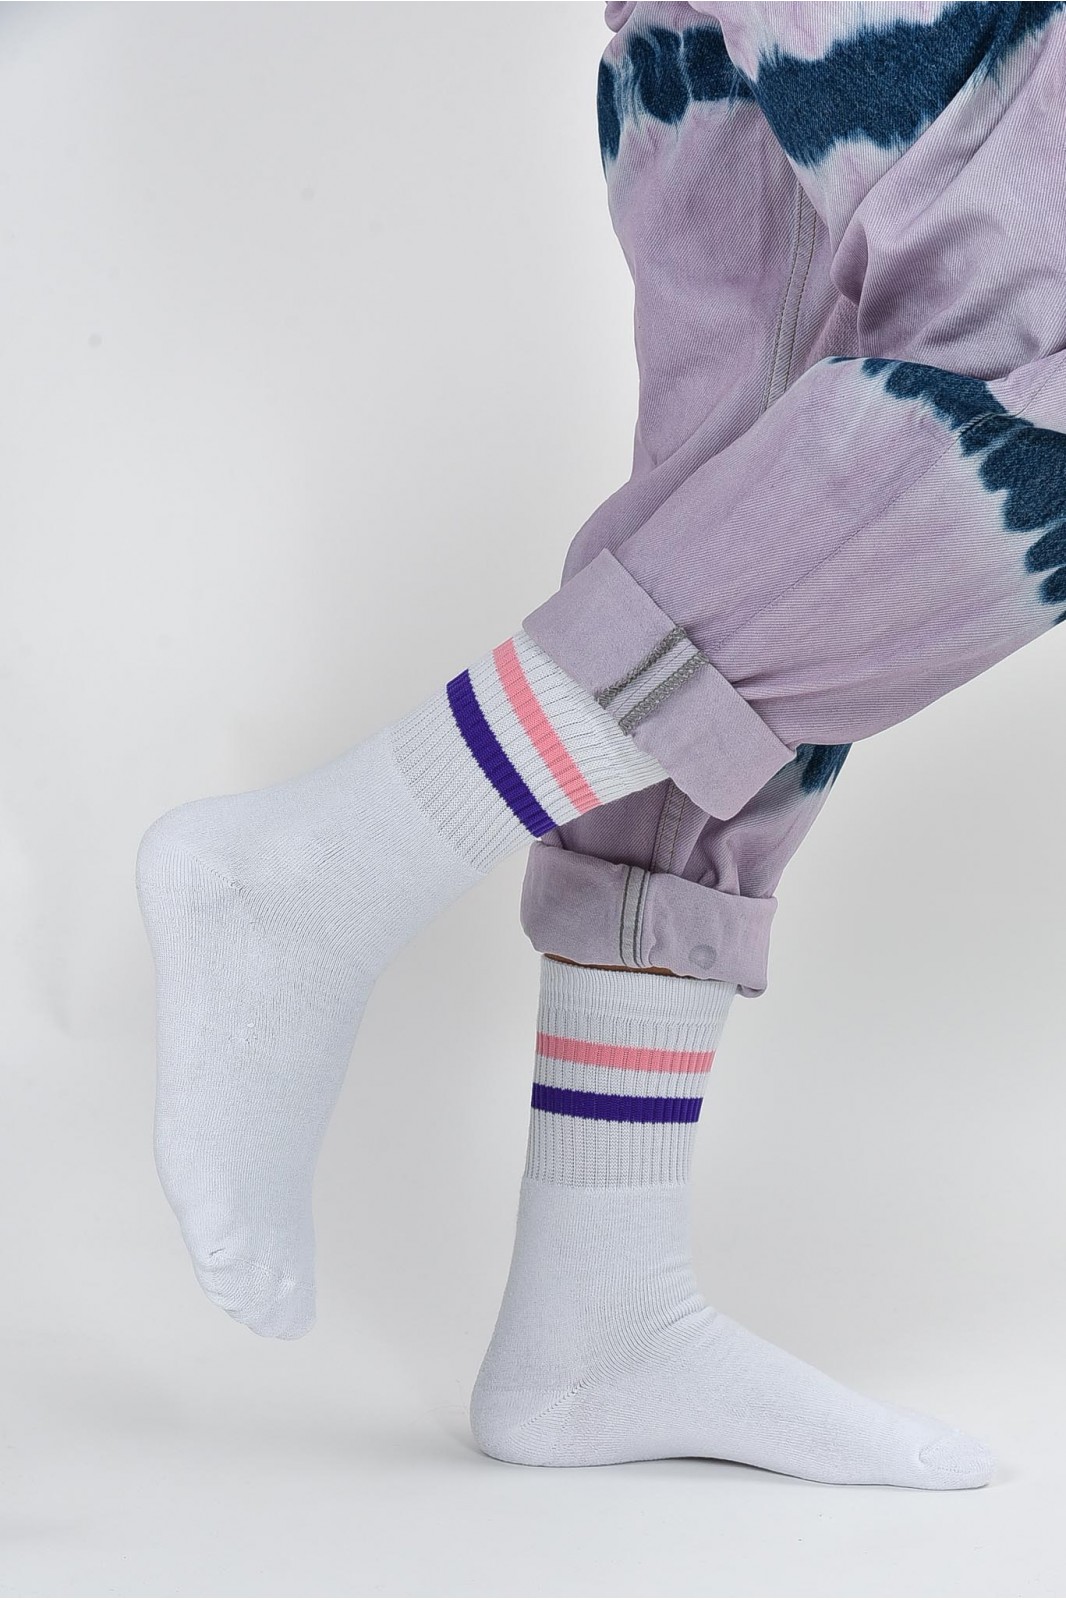 Athletic socks with coloured stripes in white